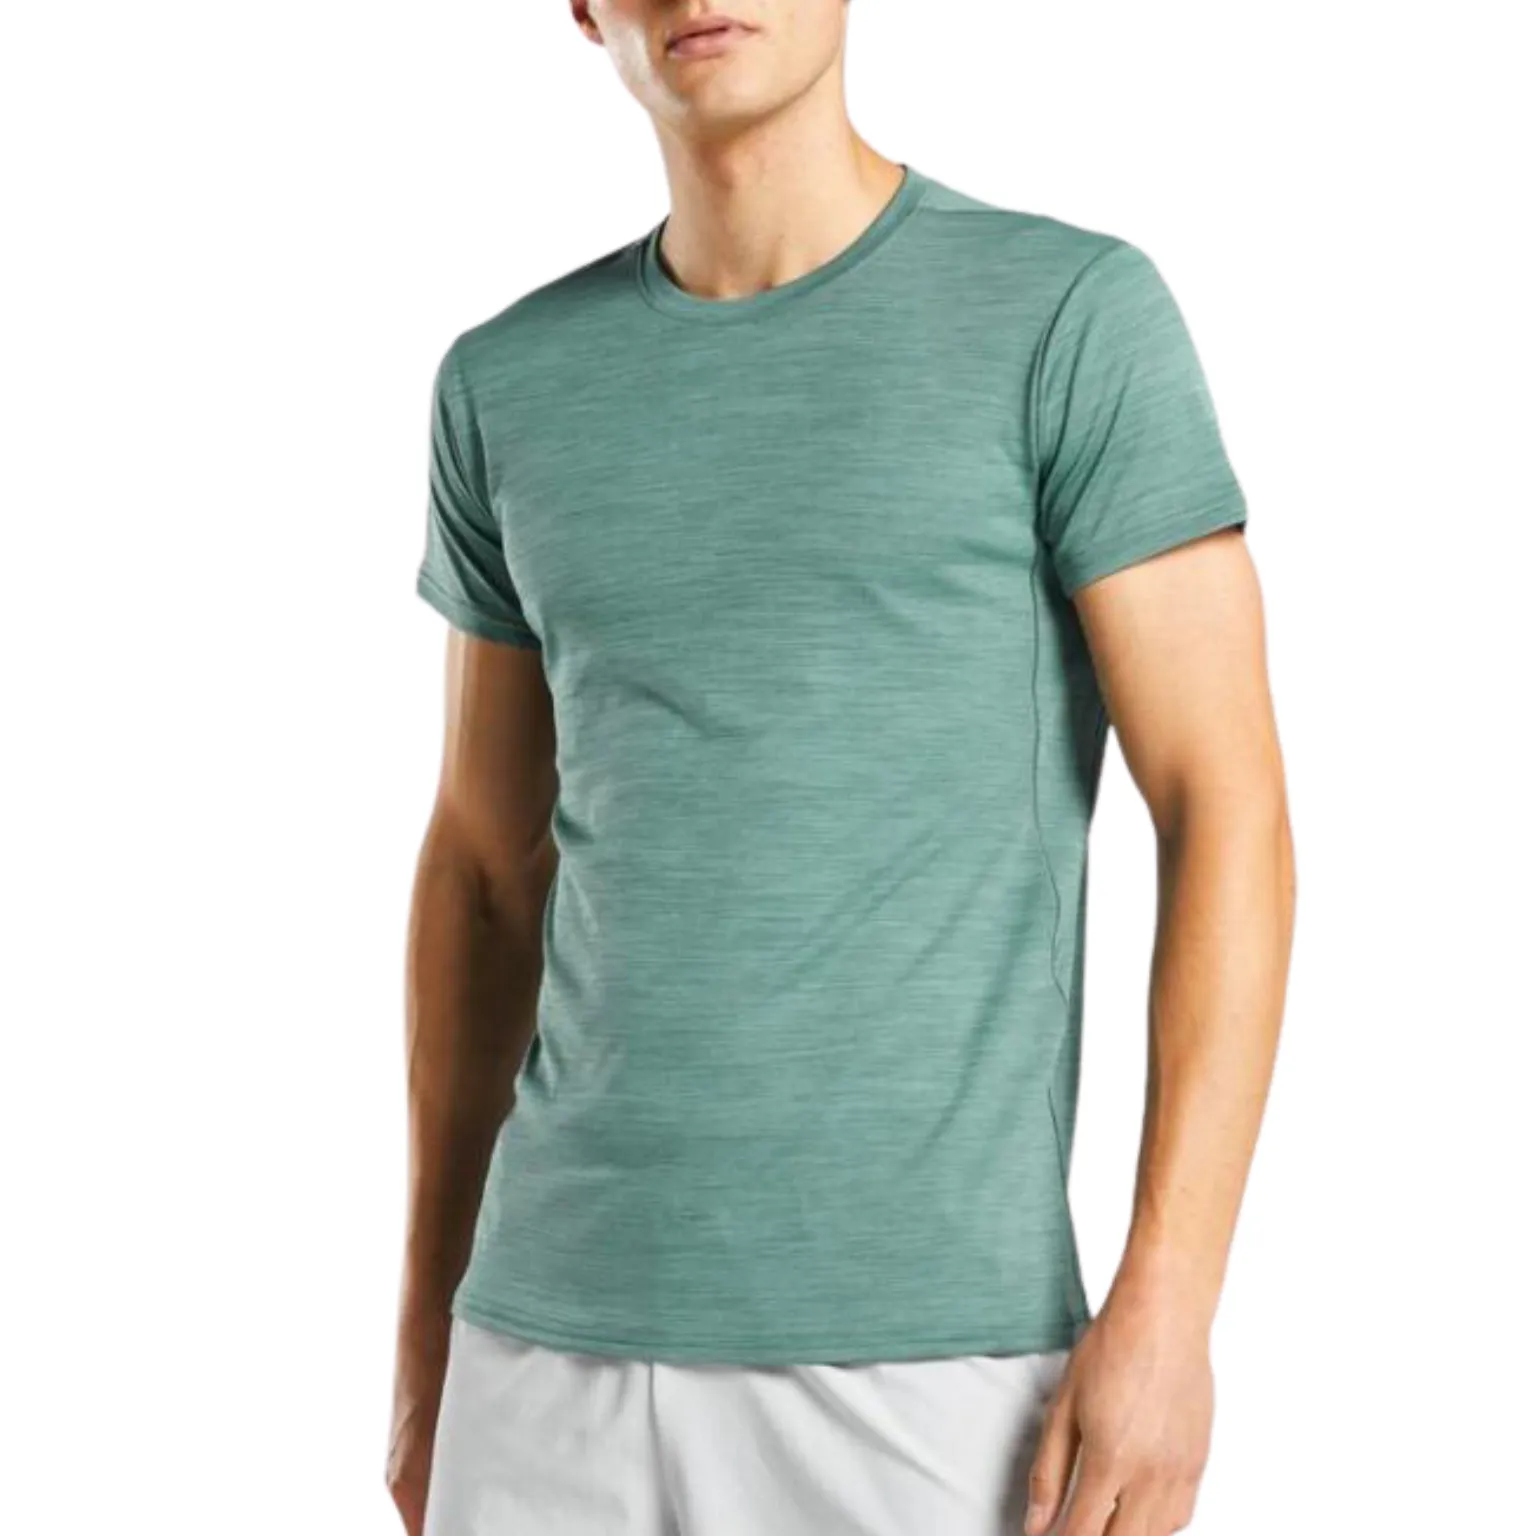 Fitness T-shirt Manufacturing with superior quality